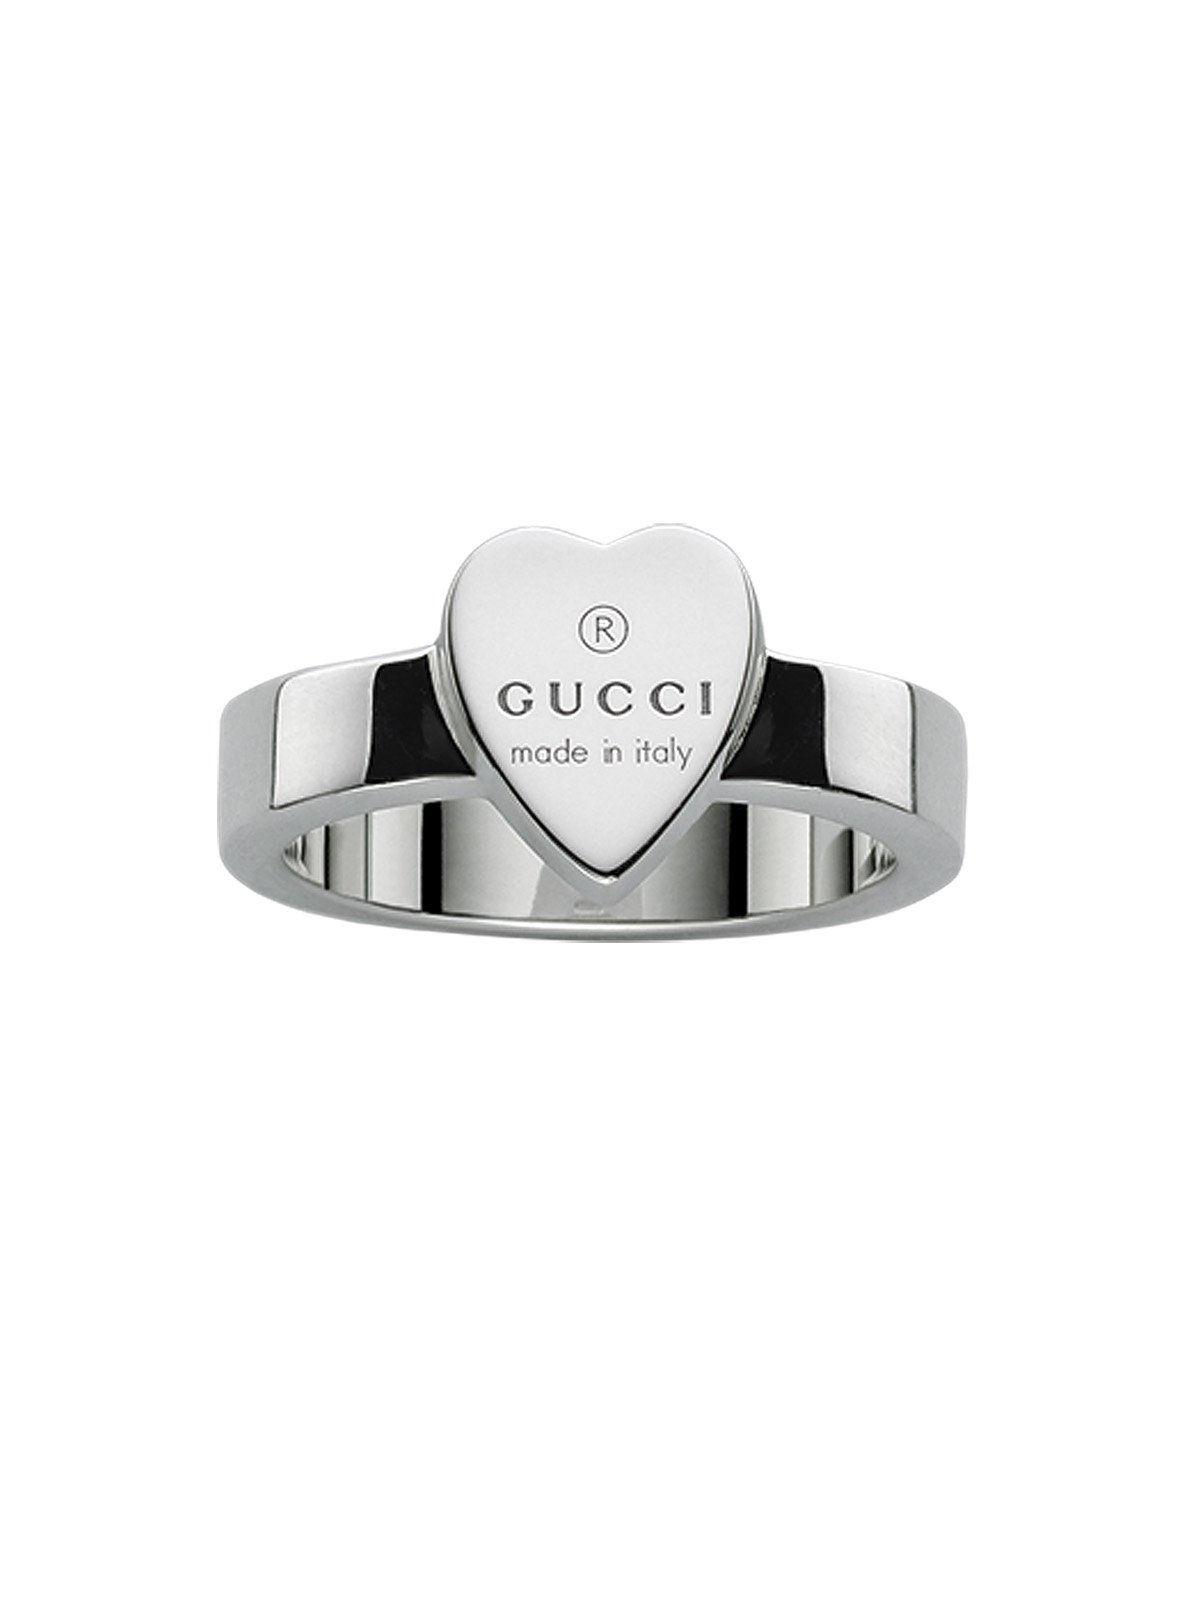 Gucci Trademark Heart Ring in Silver - Size 13